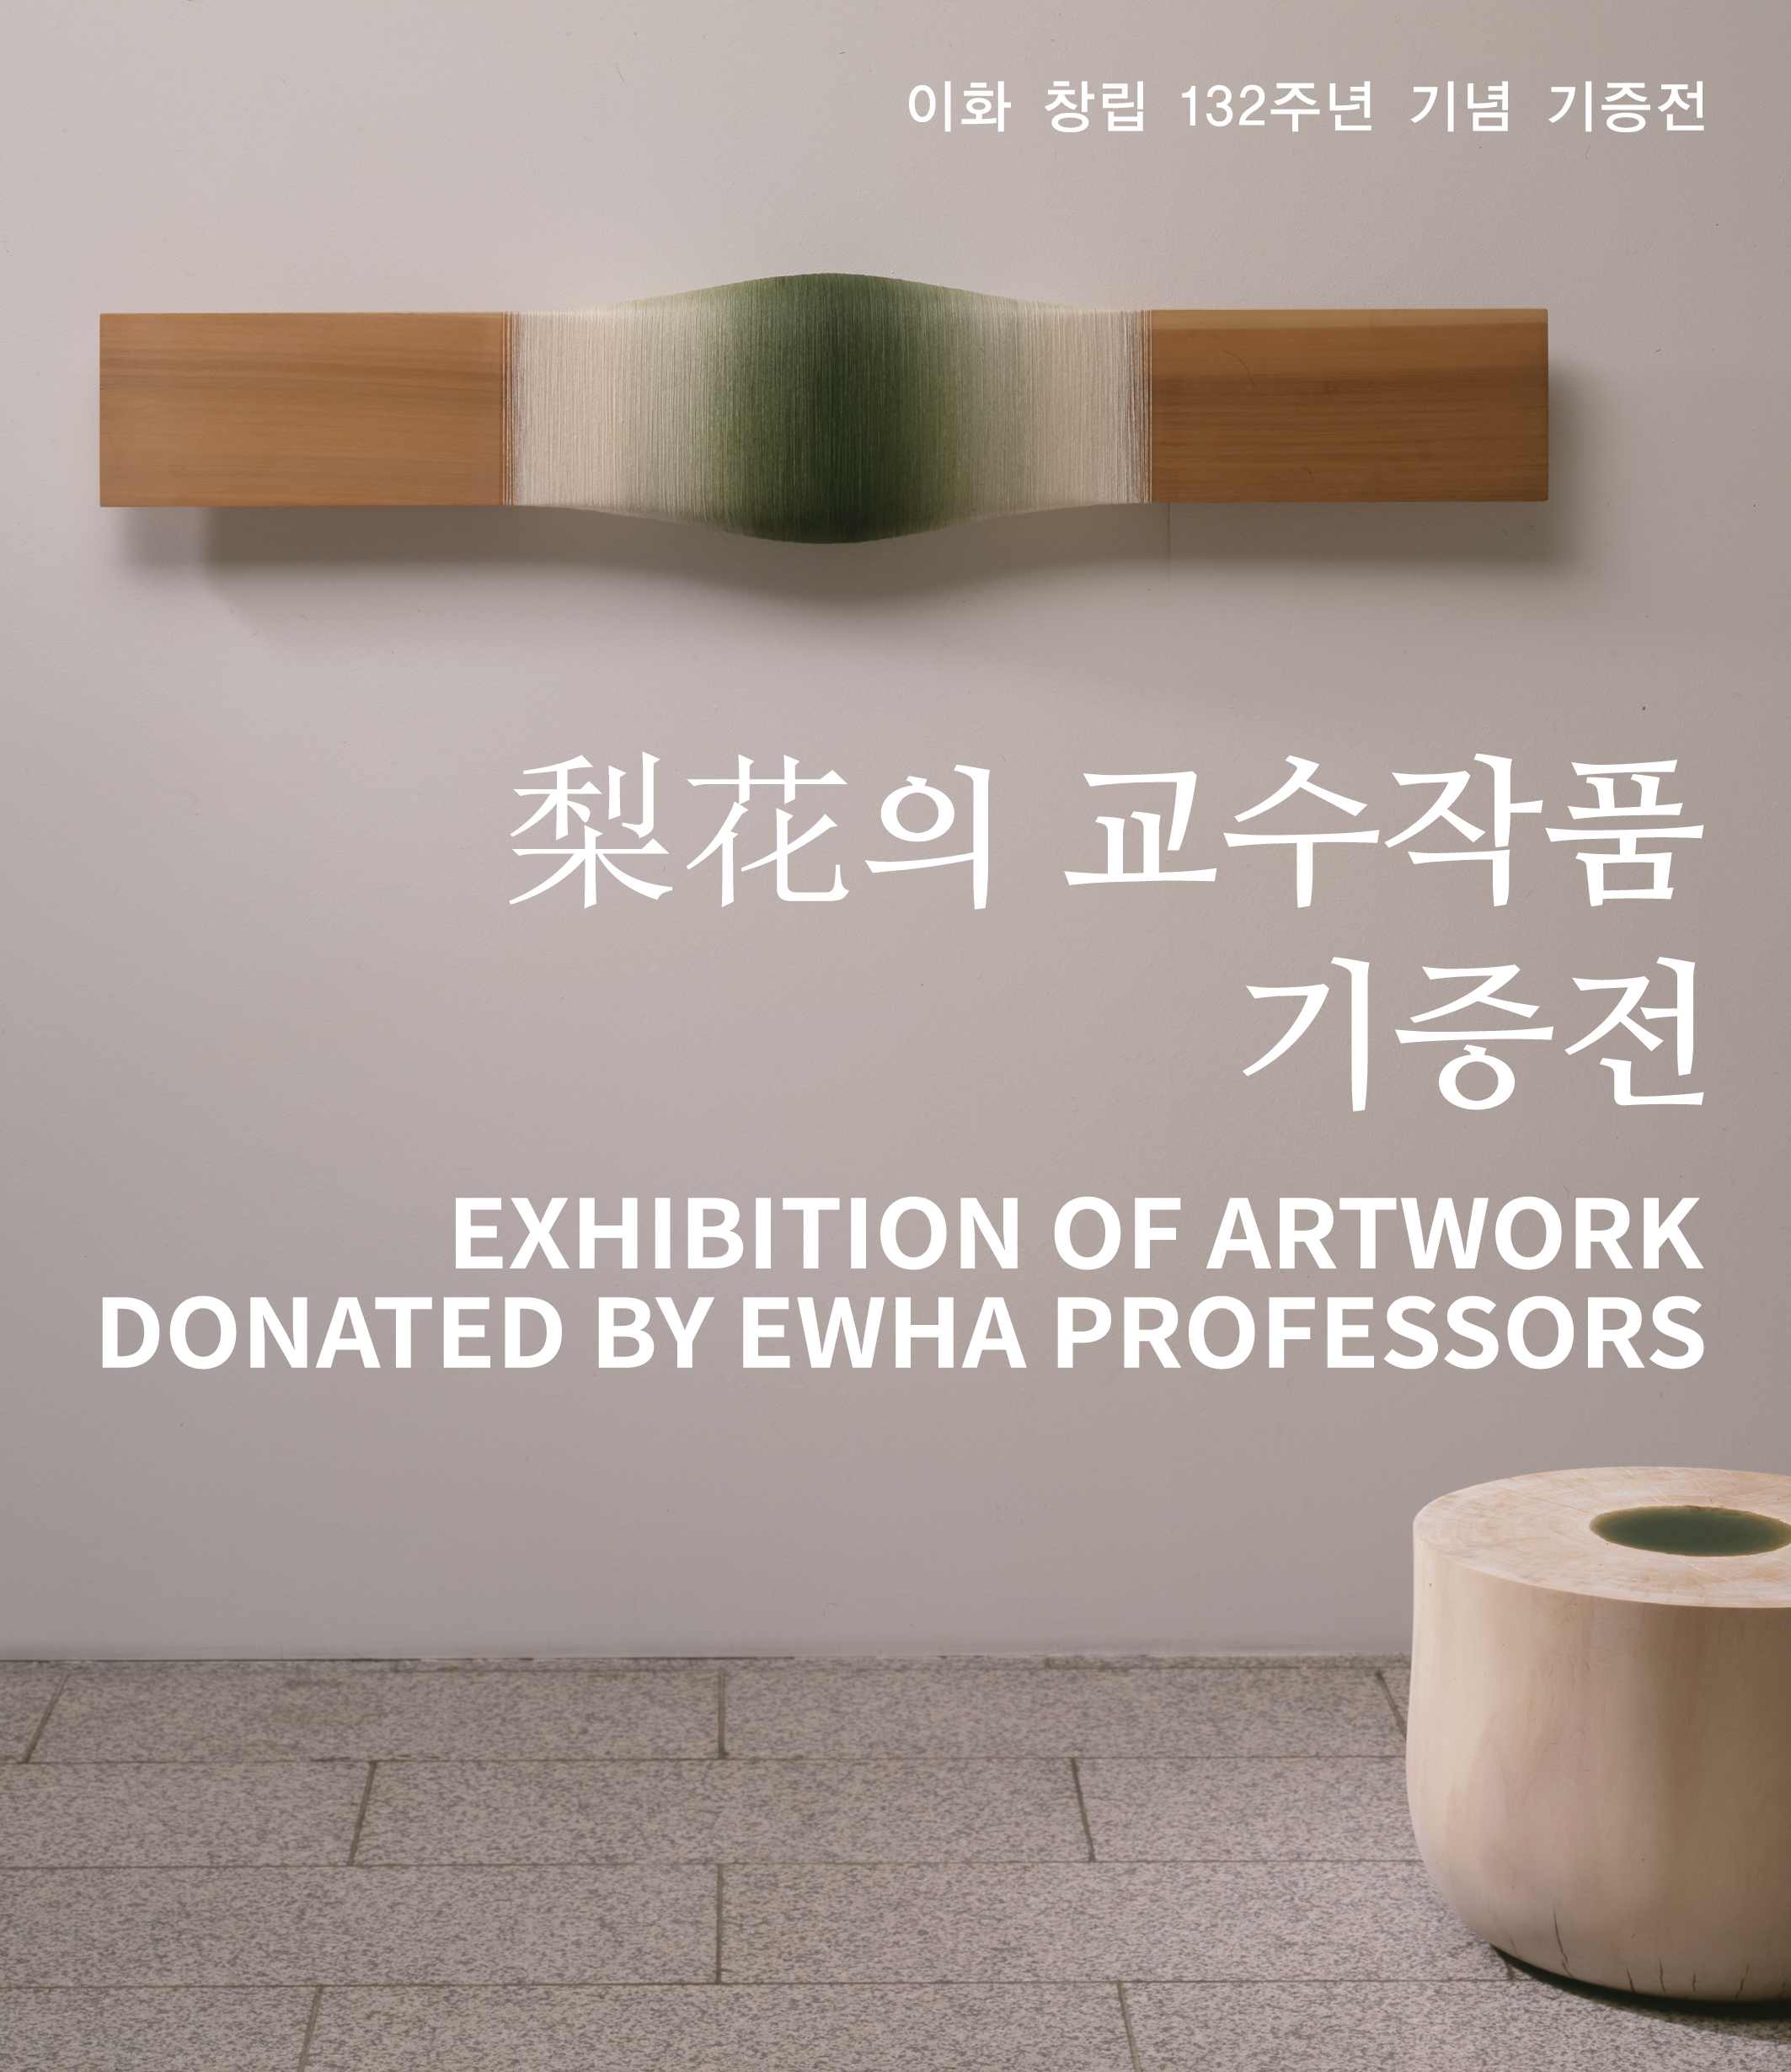 EXHIBITION OF ARTWORK DONATED BY EWHA PROFESSORS